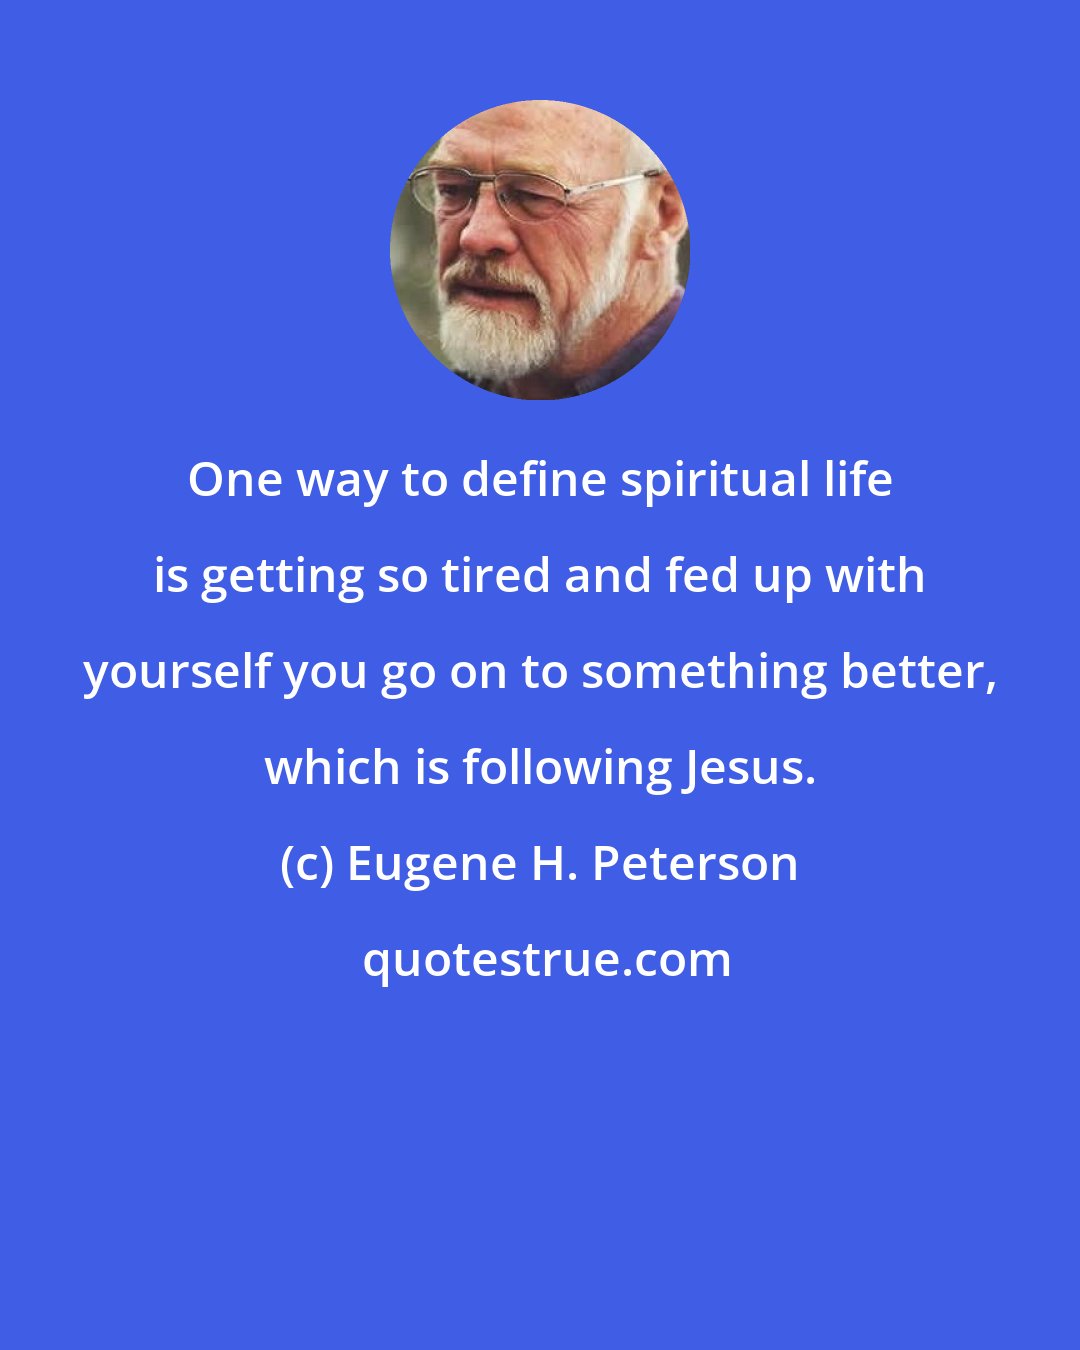 Eugene H. Peterson: One way to define spiritual life is getting so tired and fed up with yourself you go on to something better, which is following Jesus.